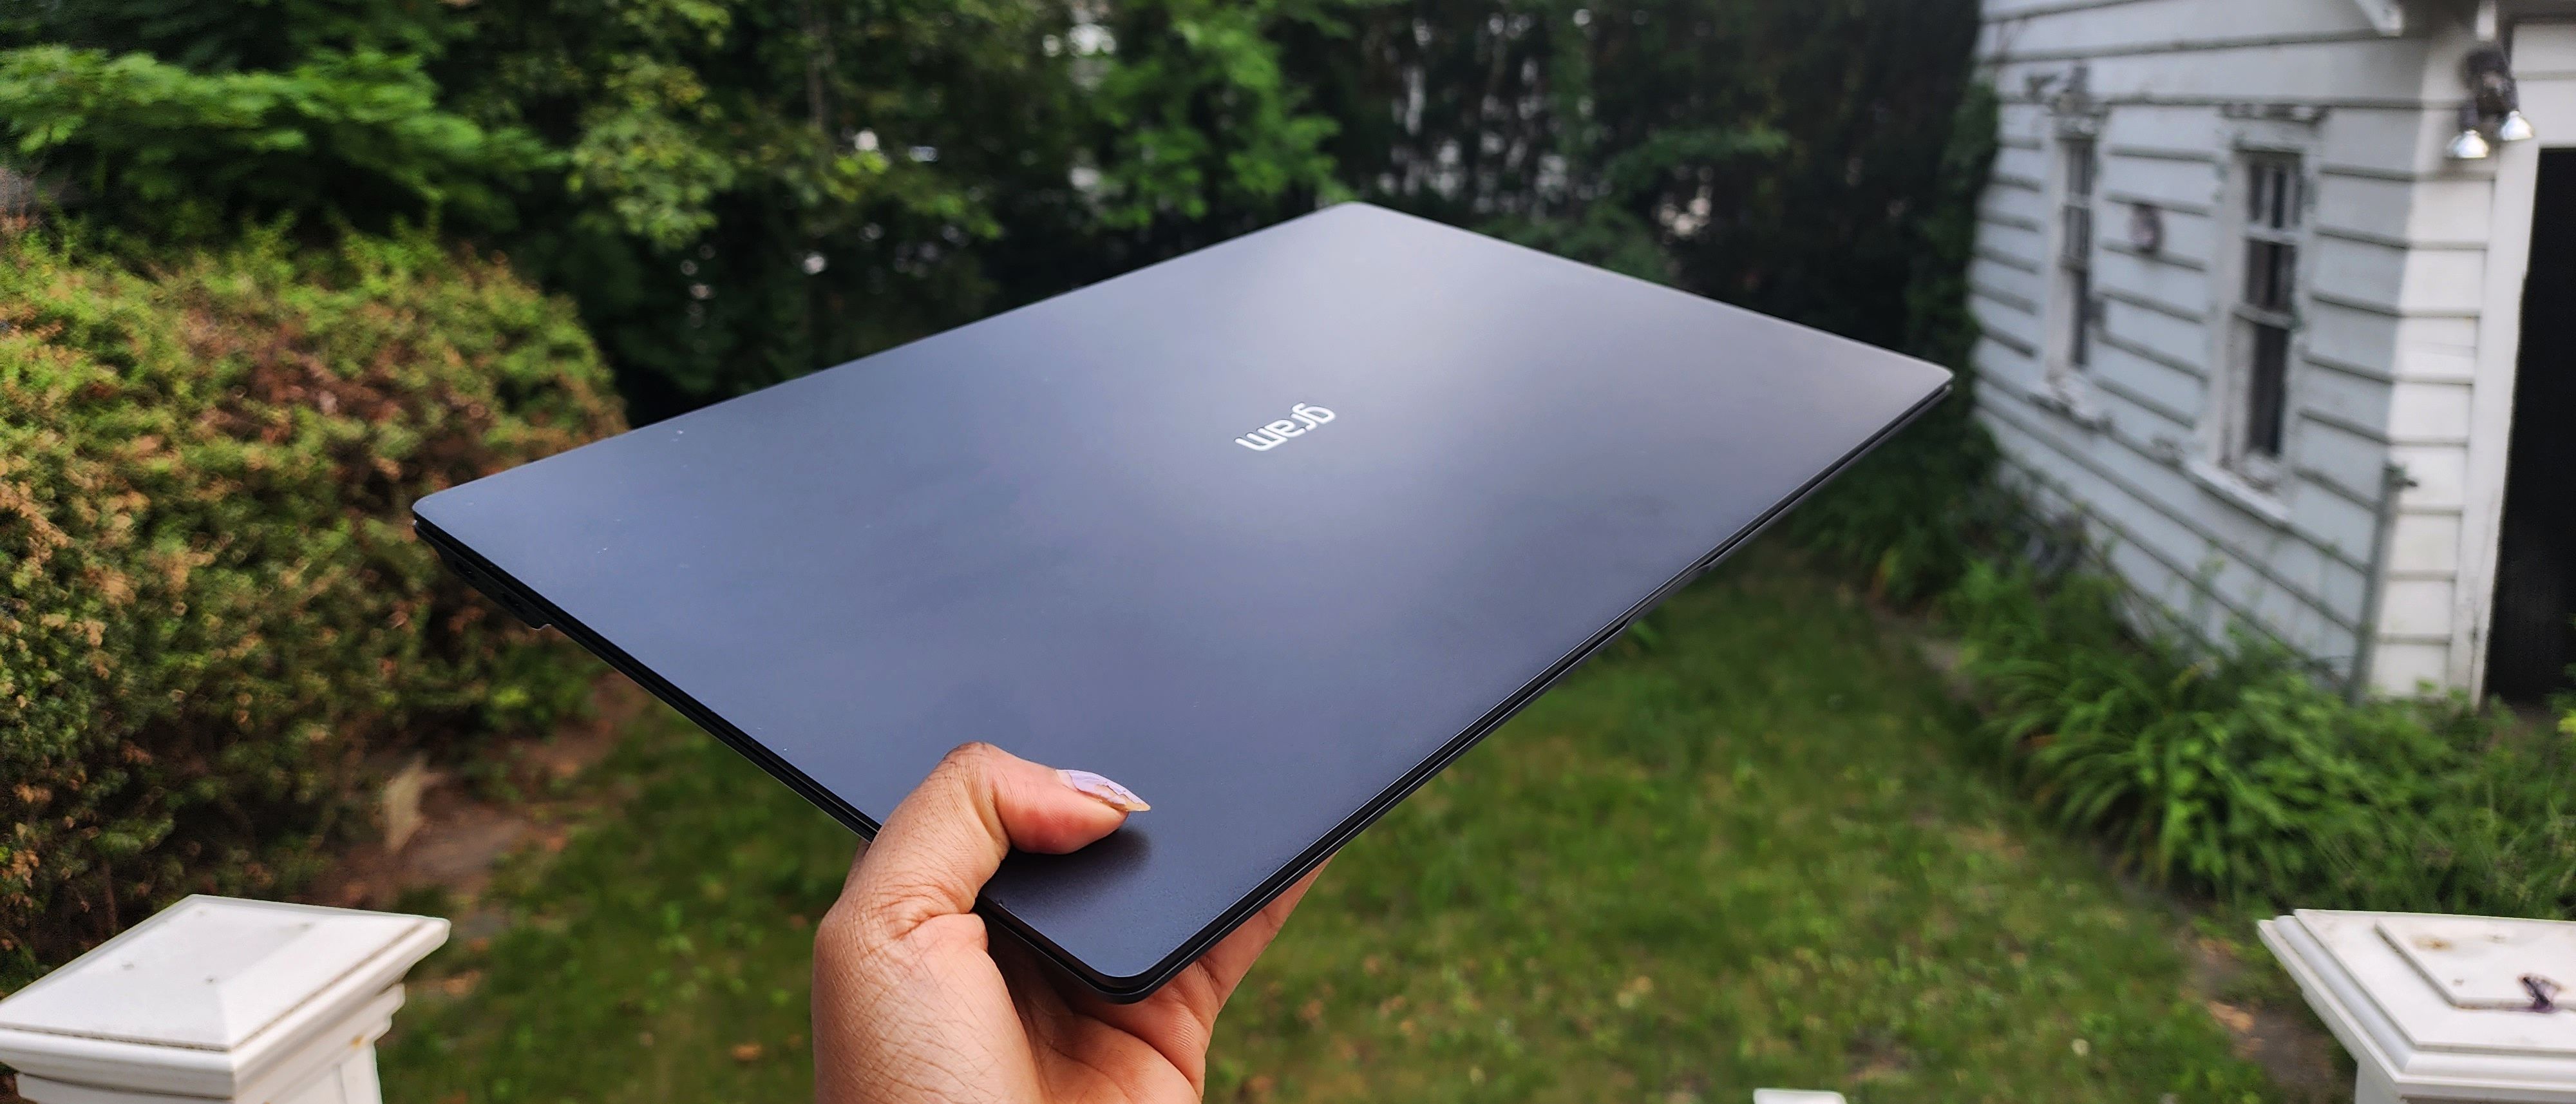 LG Gram SuperSlim review: World's thinnest laptop with great